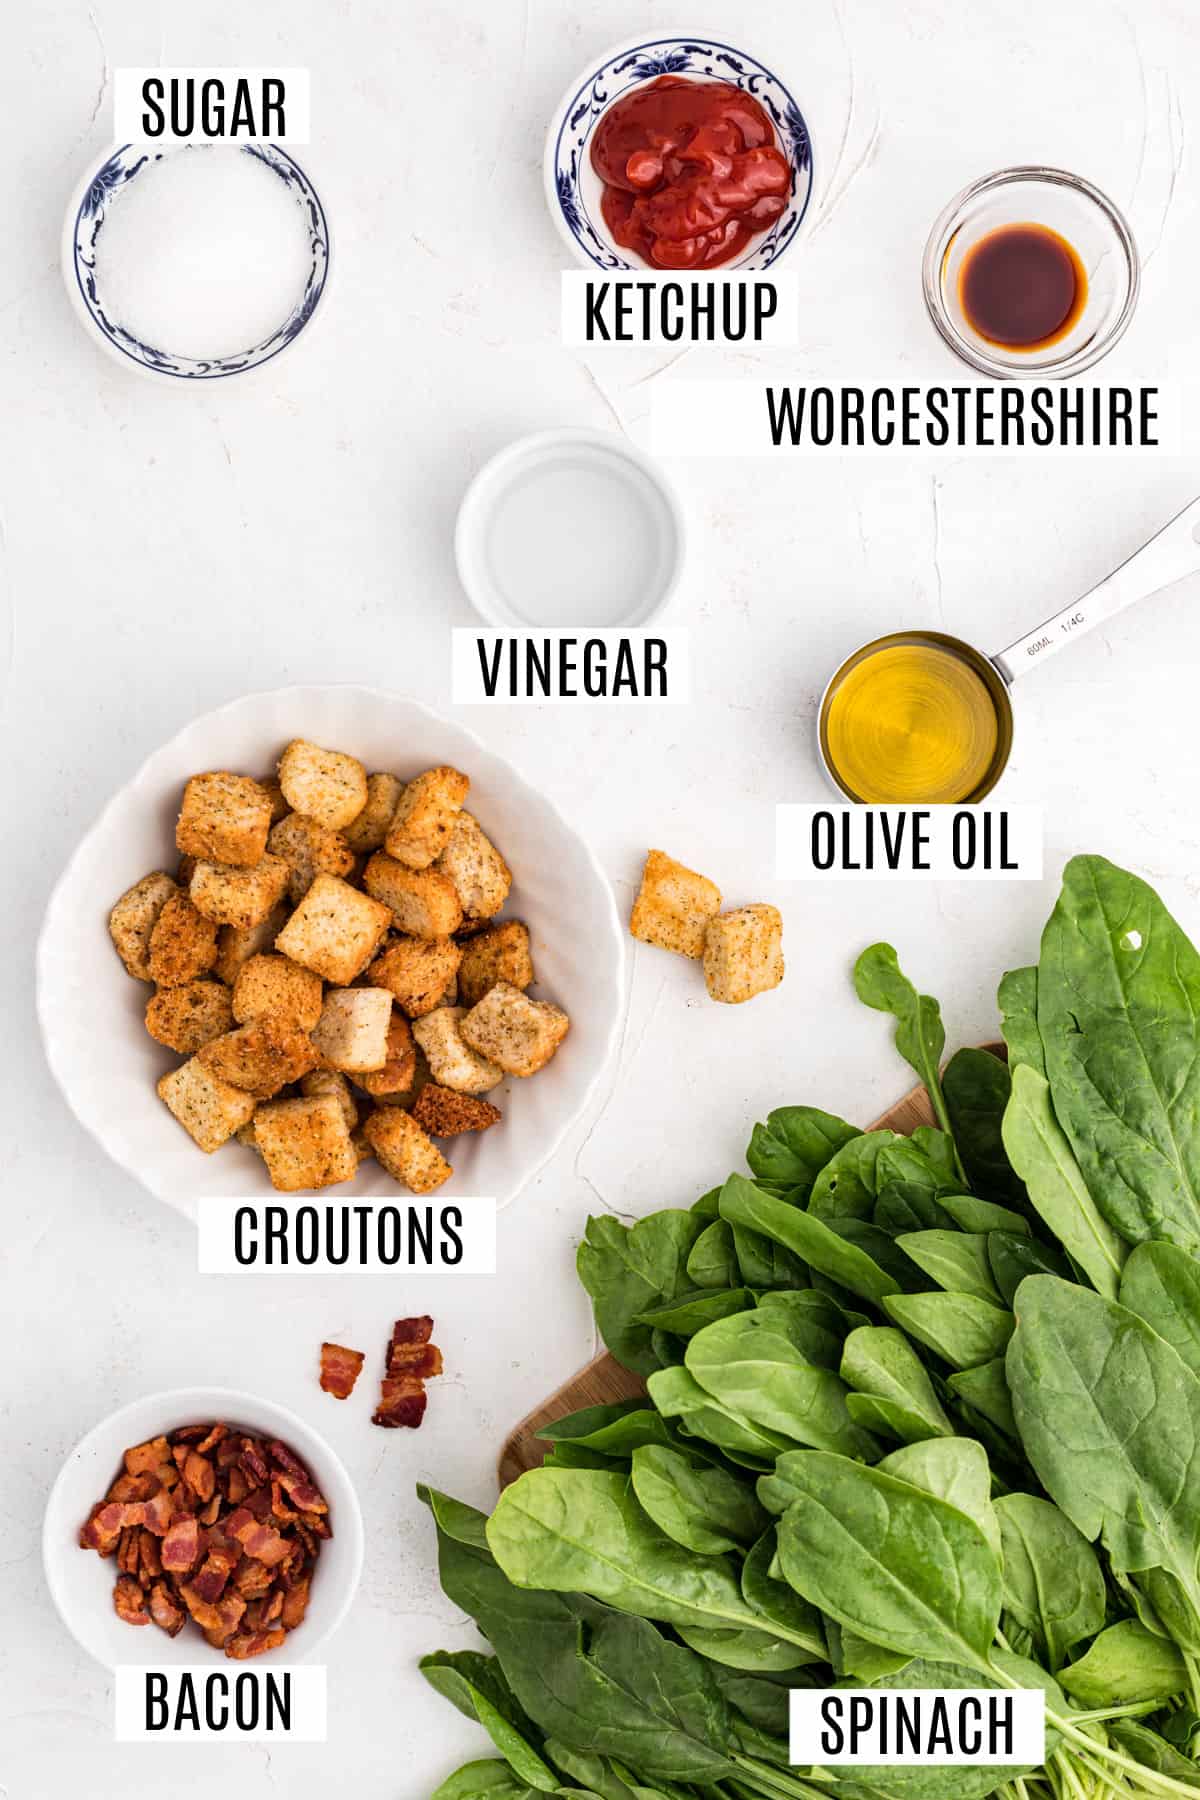 Ingredients needed for spinach salad with bacon.